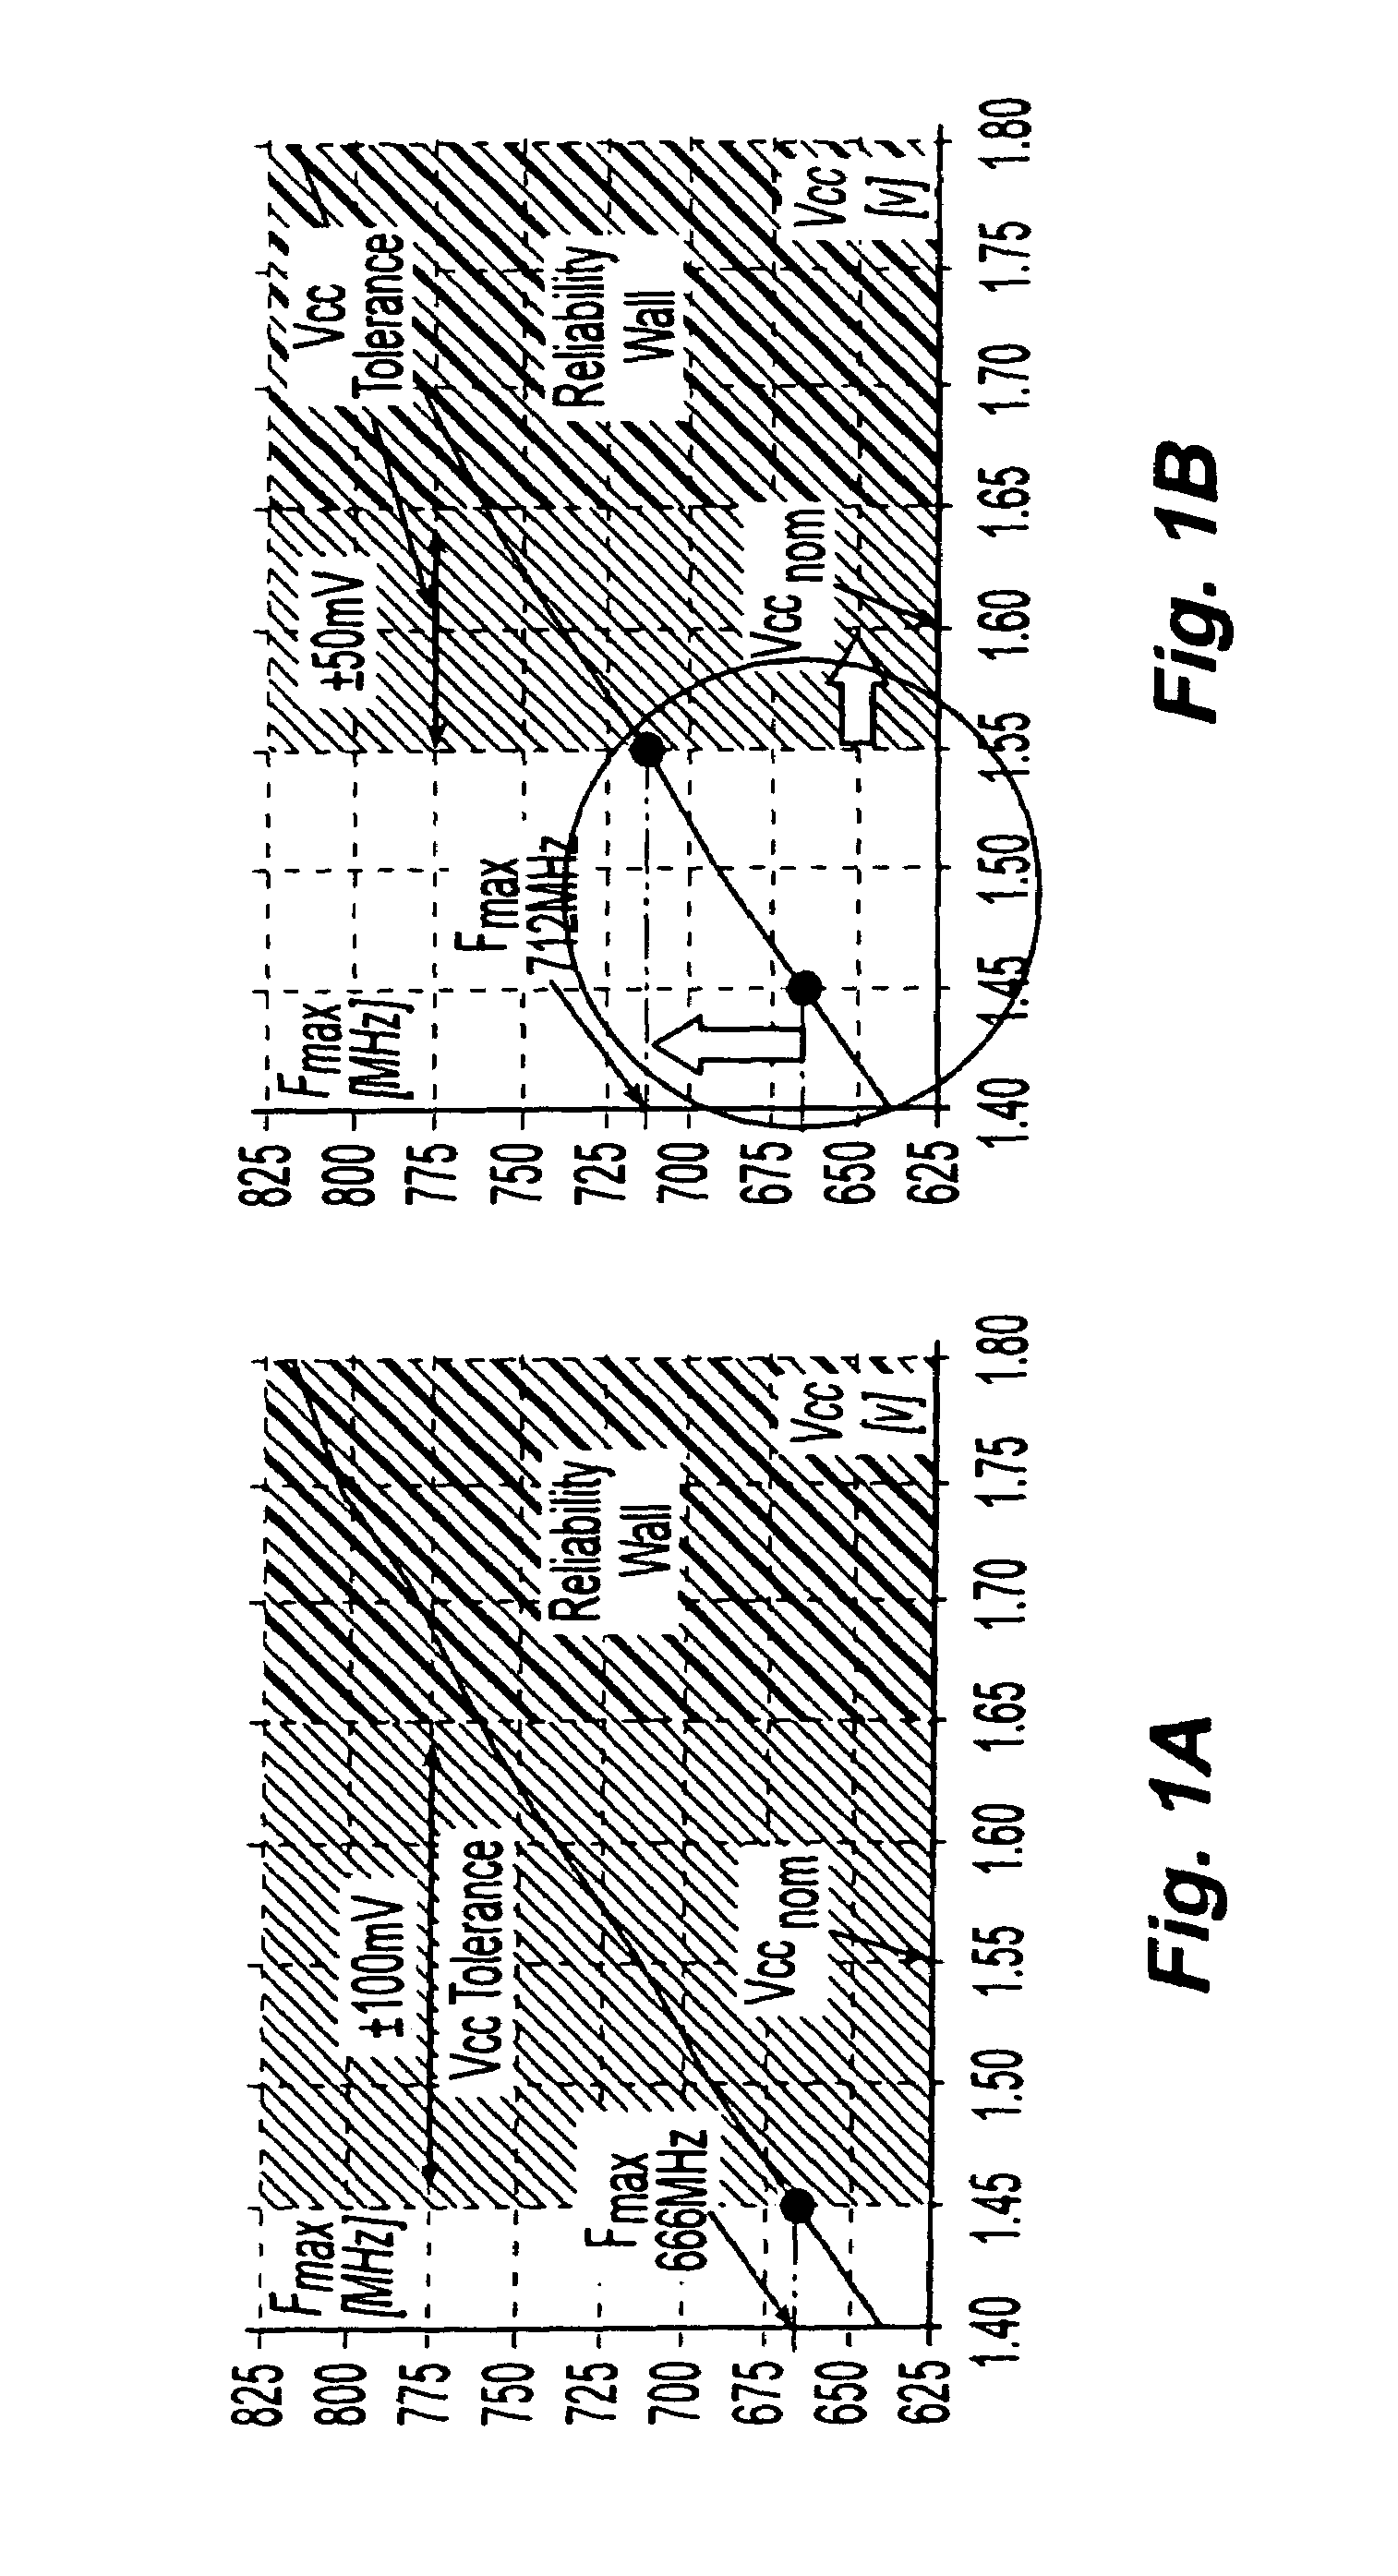 Decoupling capacitor for an integrated circuit and method of manufacturing thereof